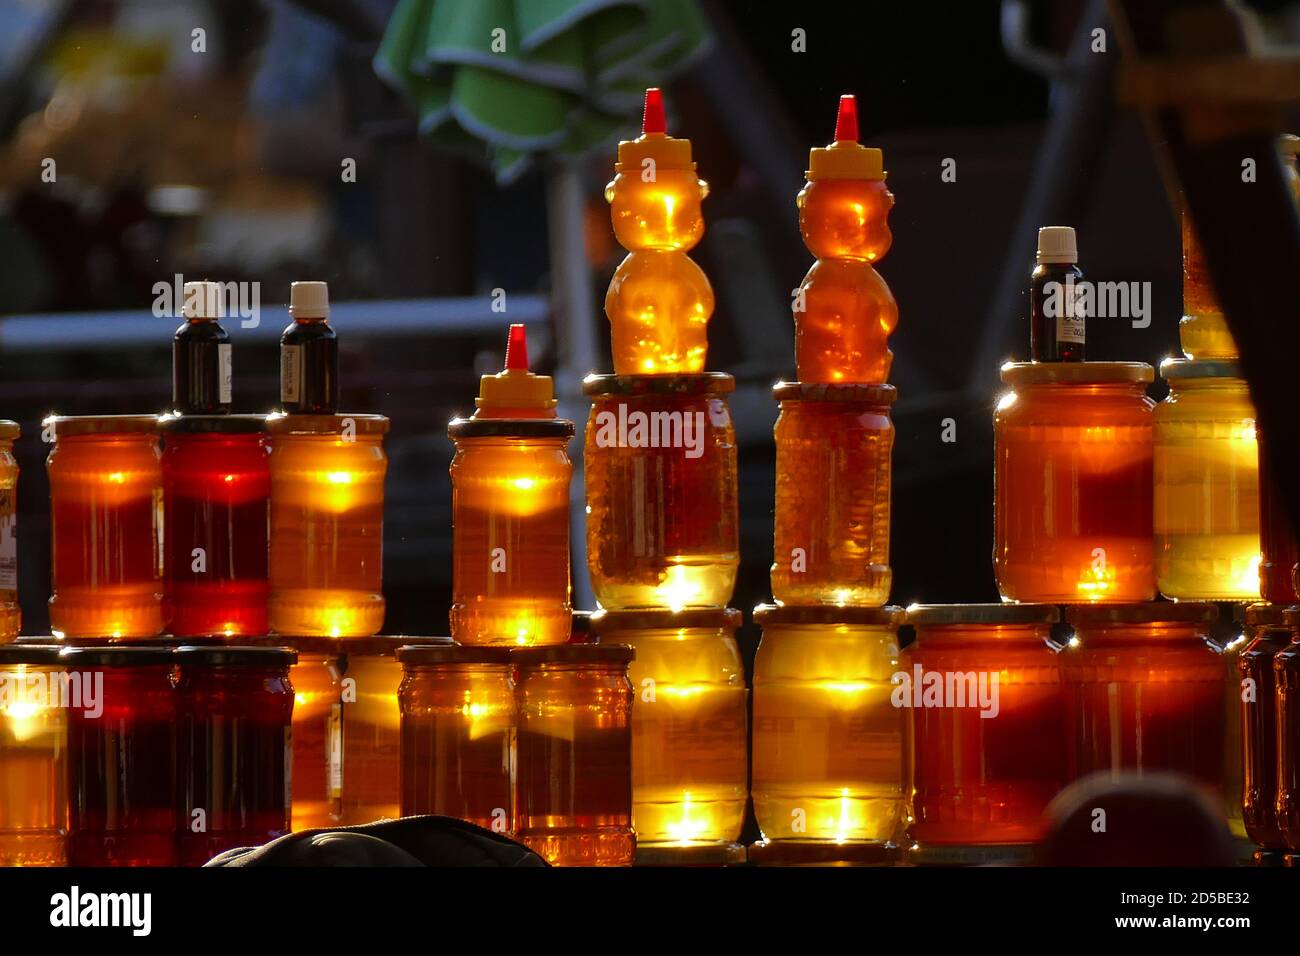 The sun sets over a honey seller's stall in the Transylvanian city of Sibiu, bringing a natural golden glow to the honey. Picture by Adam Alexander Stock Photo